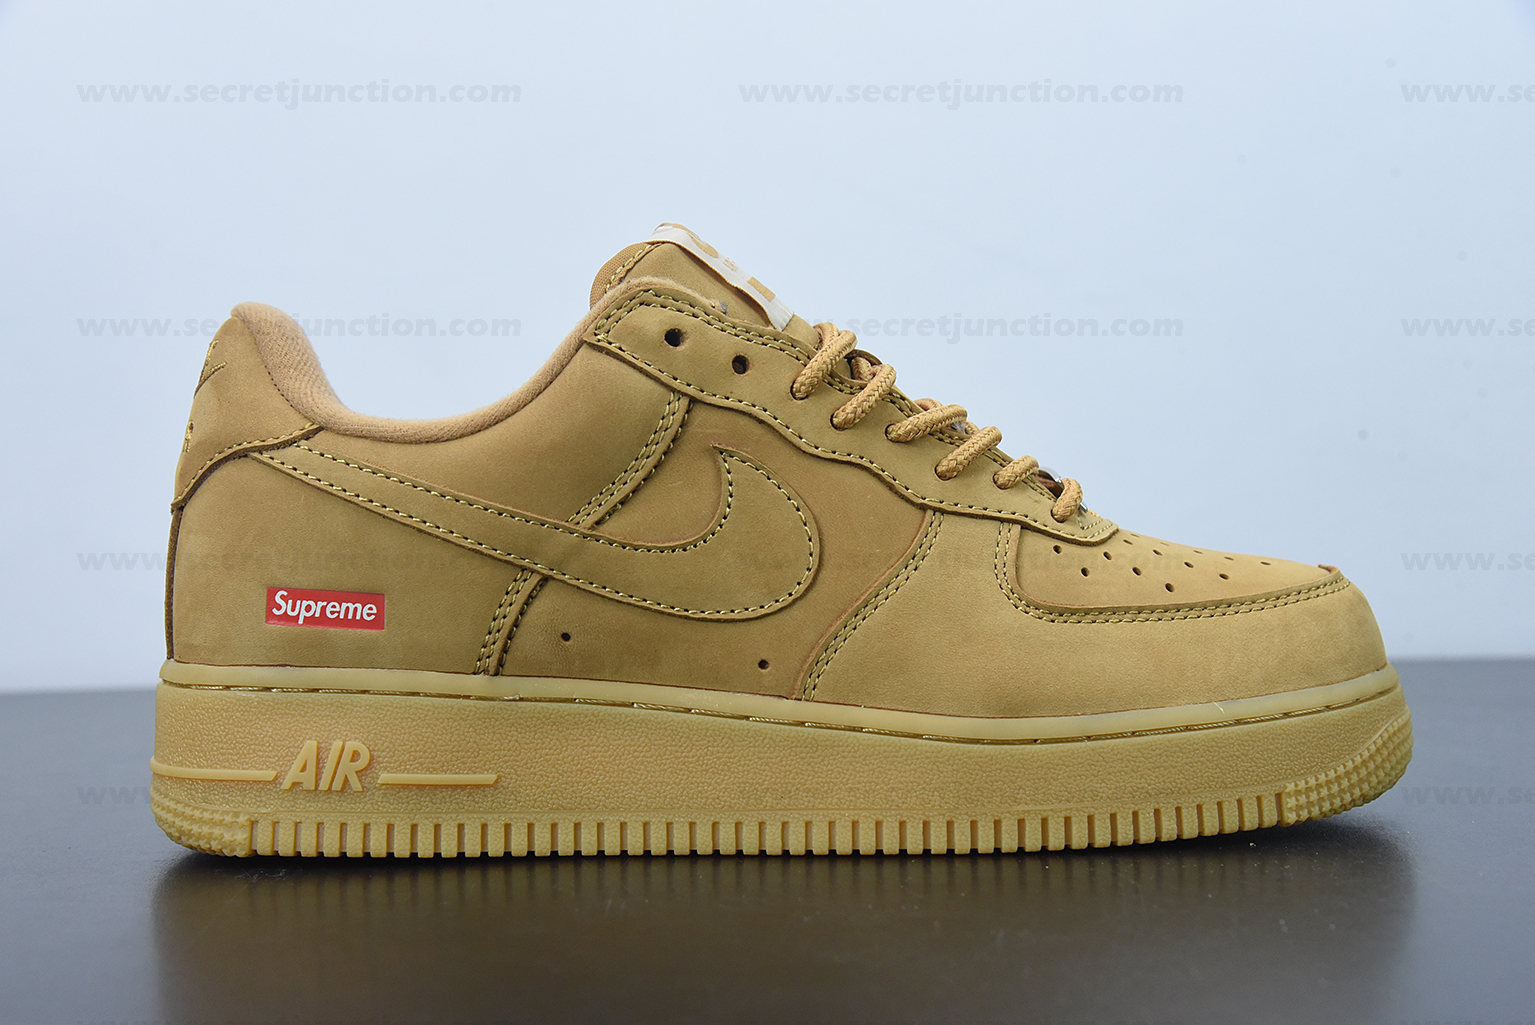 SUPREME X AIR FORCE 1 LOW – “WHEAT”